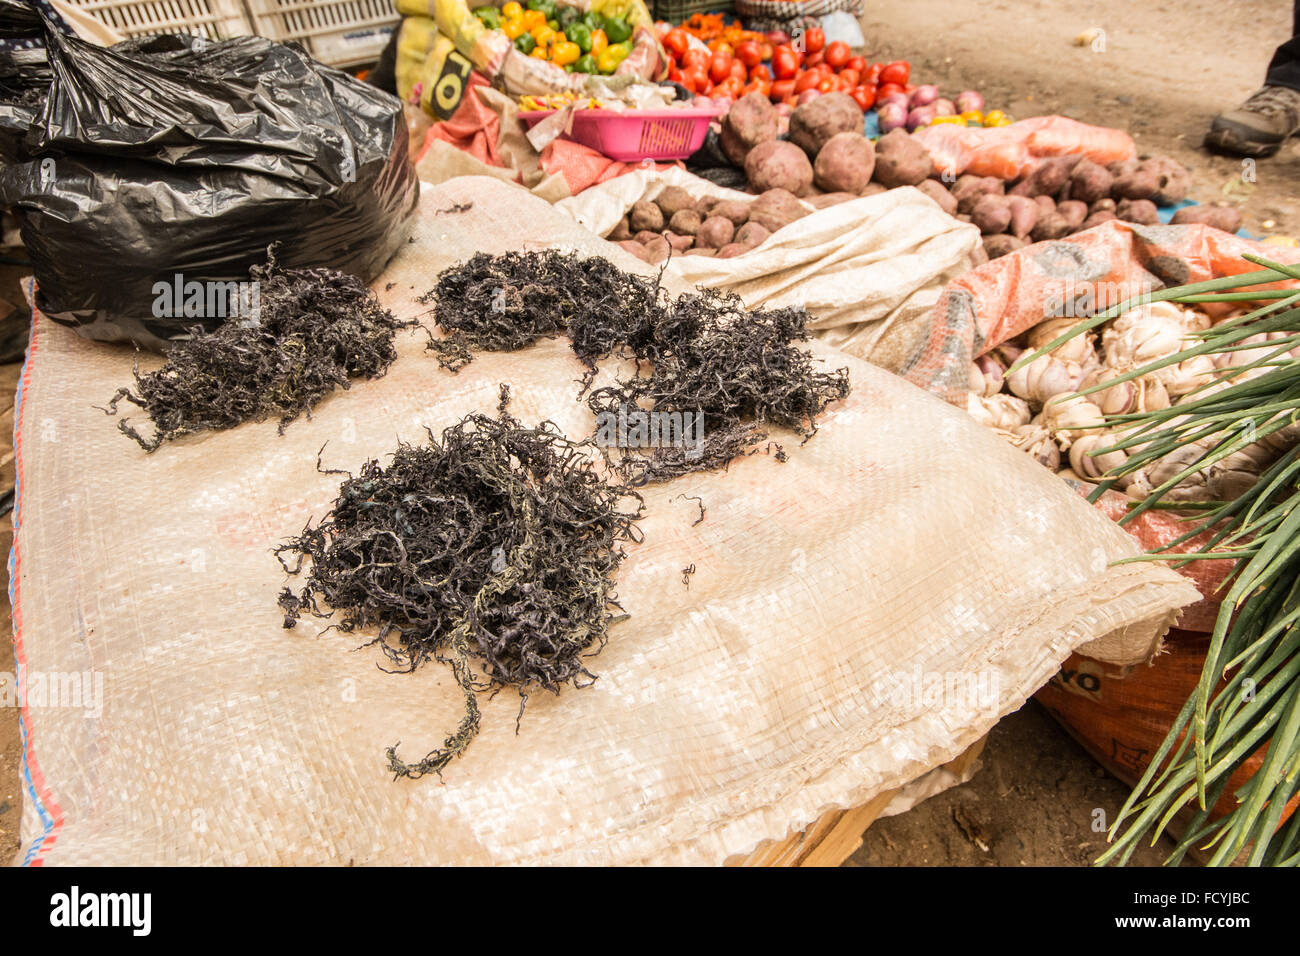 Mococho, a type of seaweed that is used as a garnish in Peruvian dishes, on sale at a street market stall in Cajabamba, Peru. Stock Photo